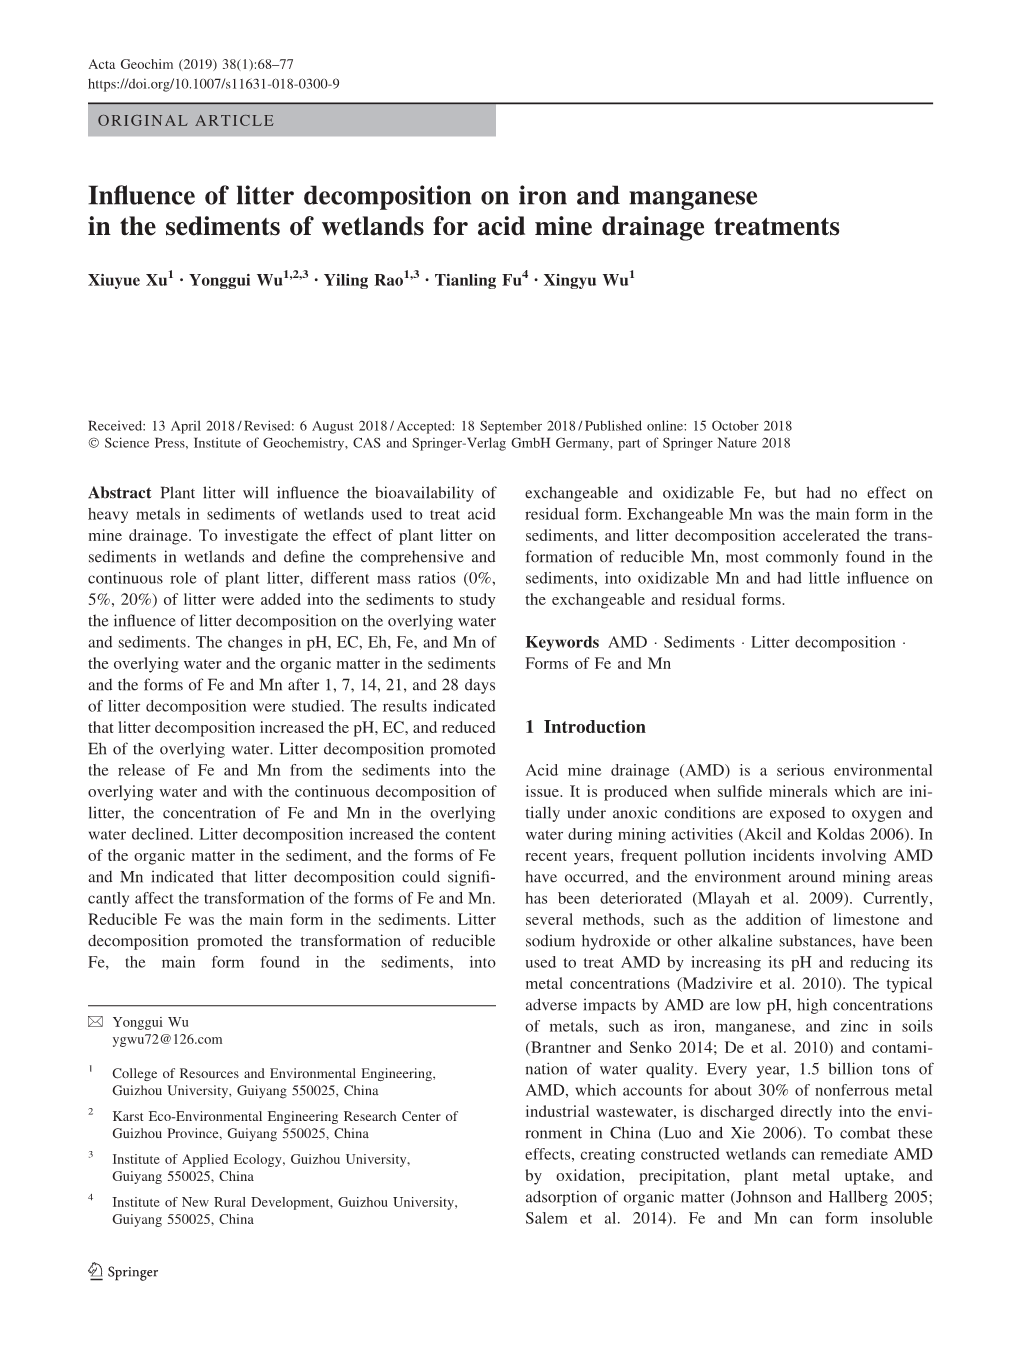 Influence of Litter Decomposition on Iron and Manganese in The